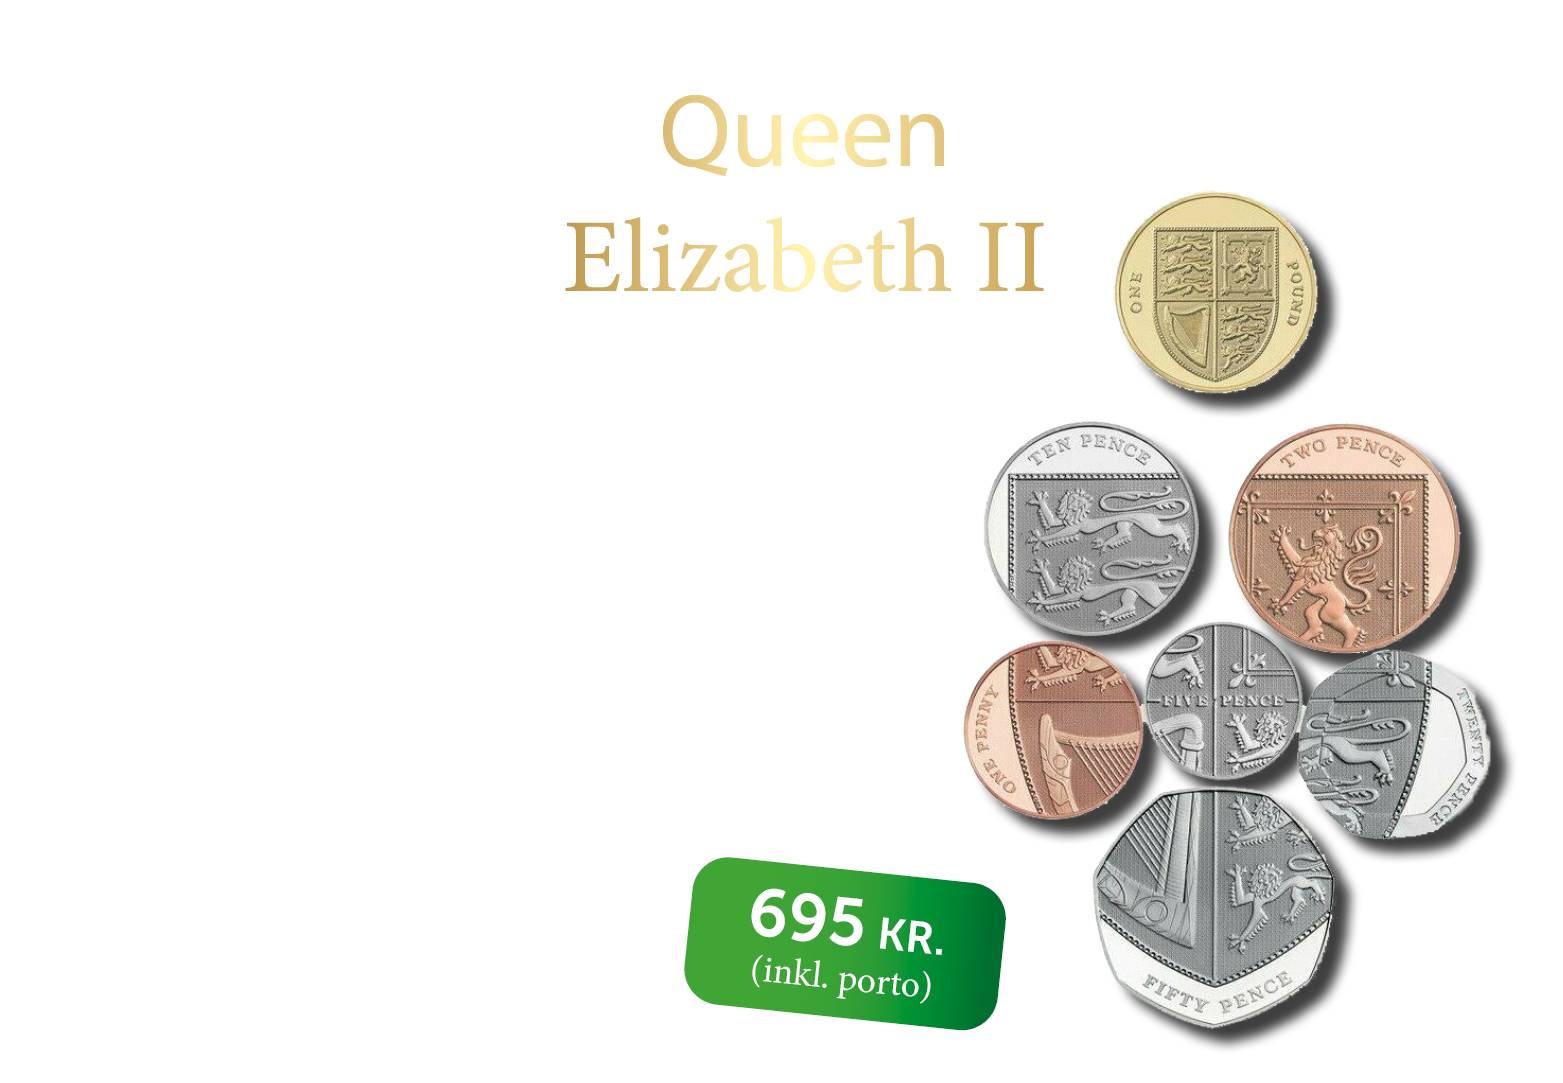 Elizabeth II - A life for the Crown 